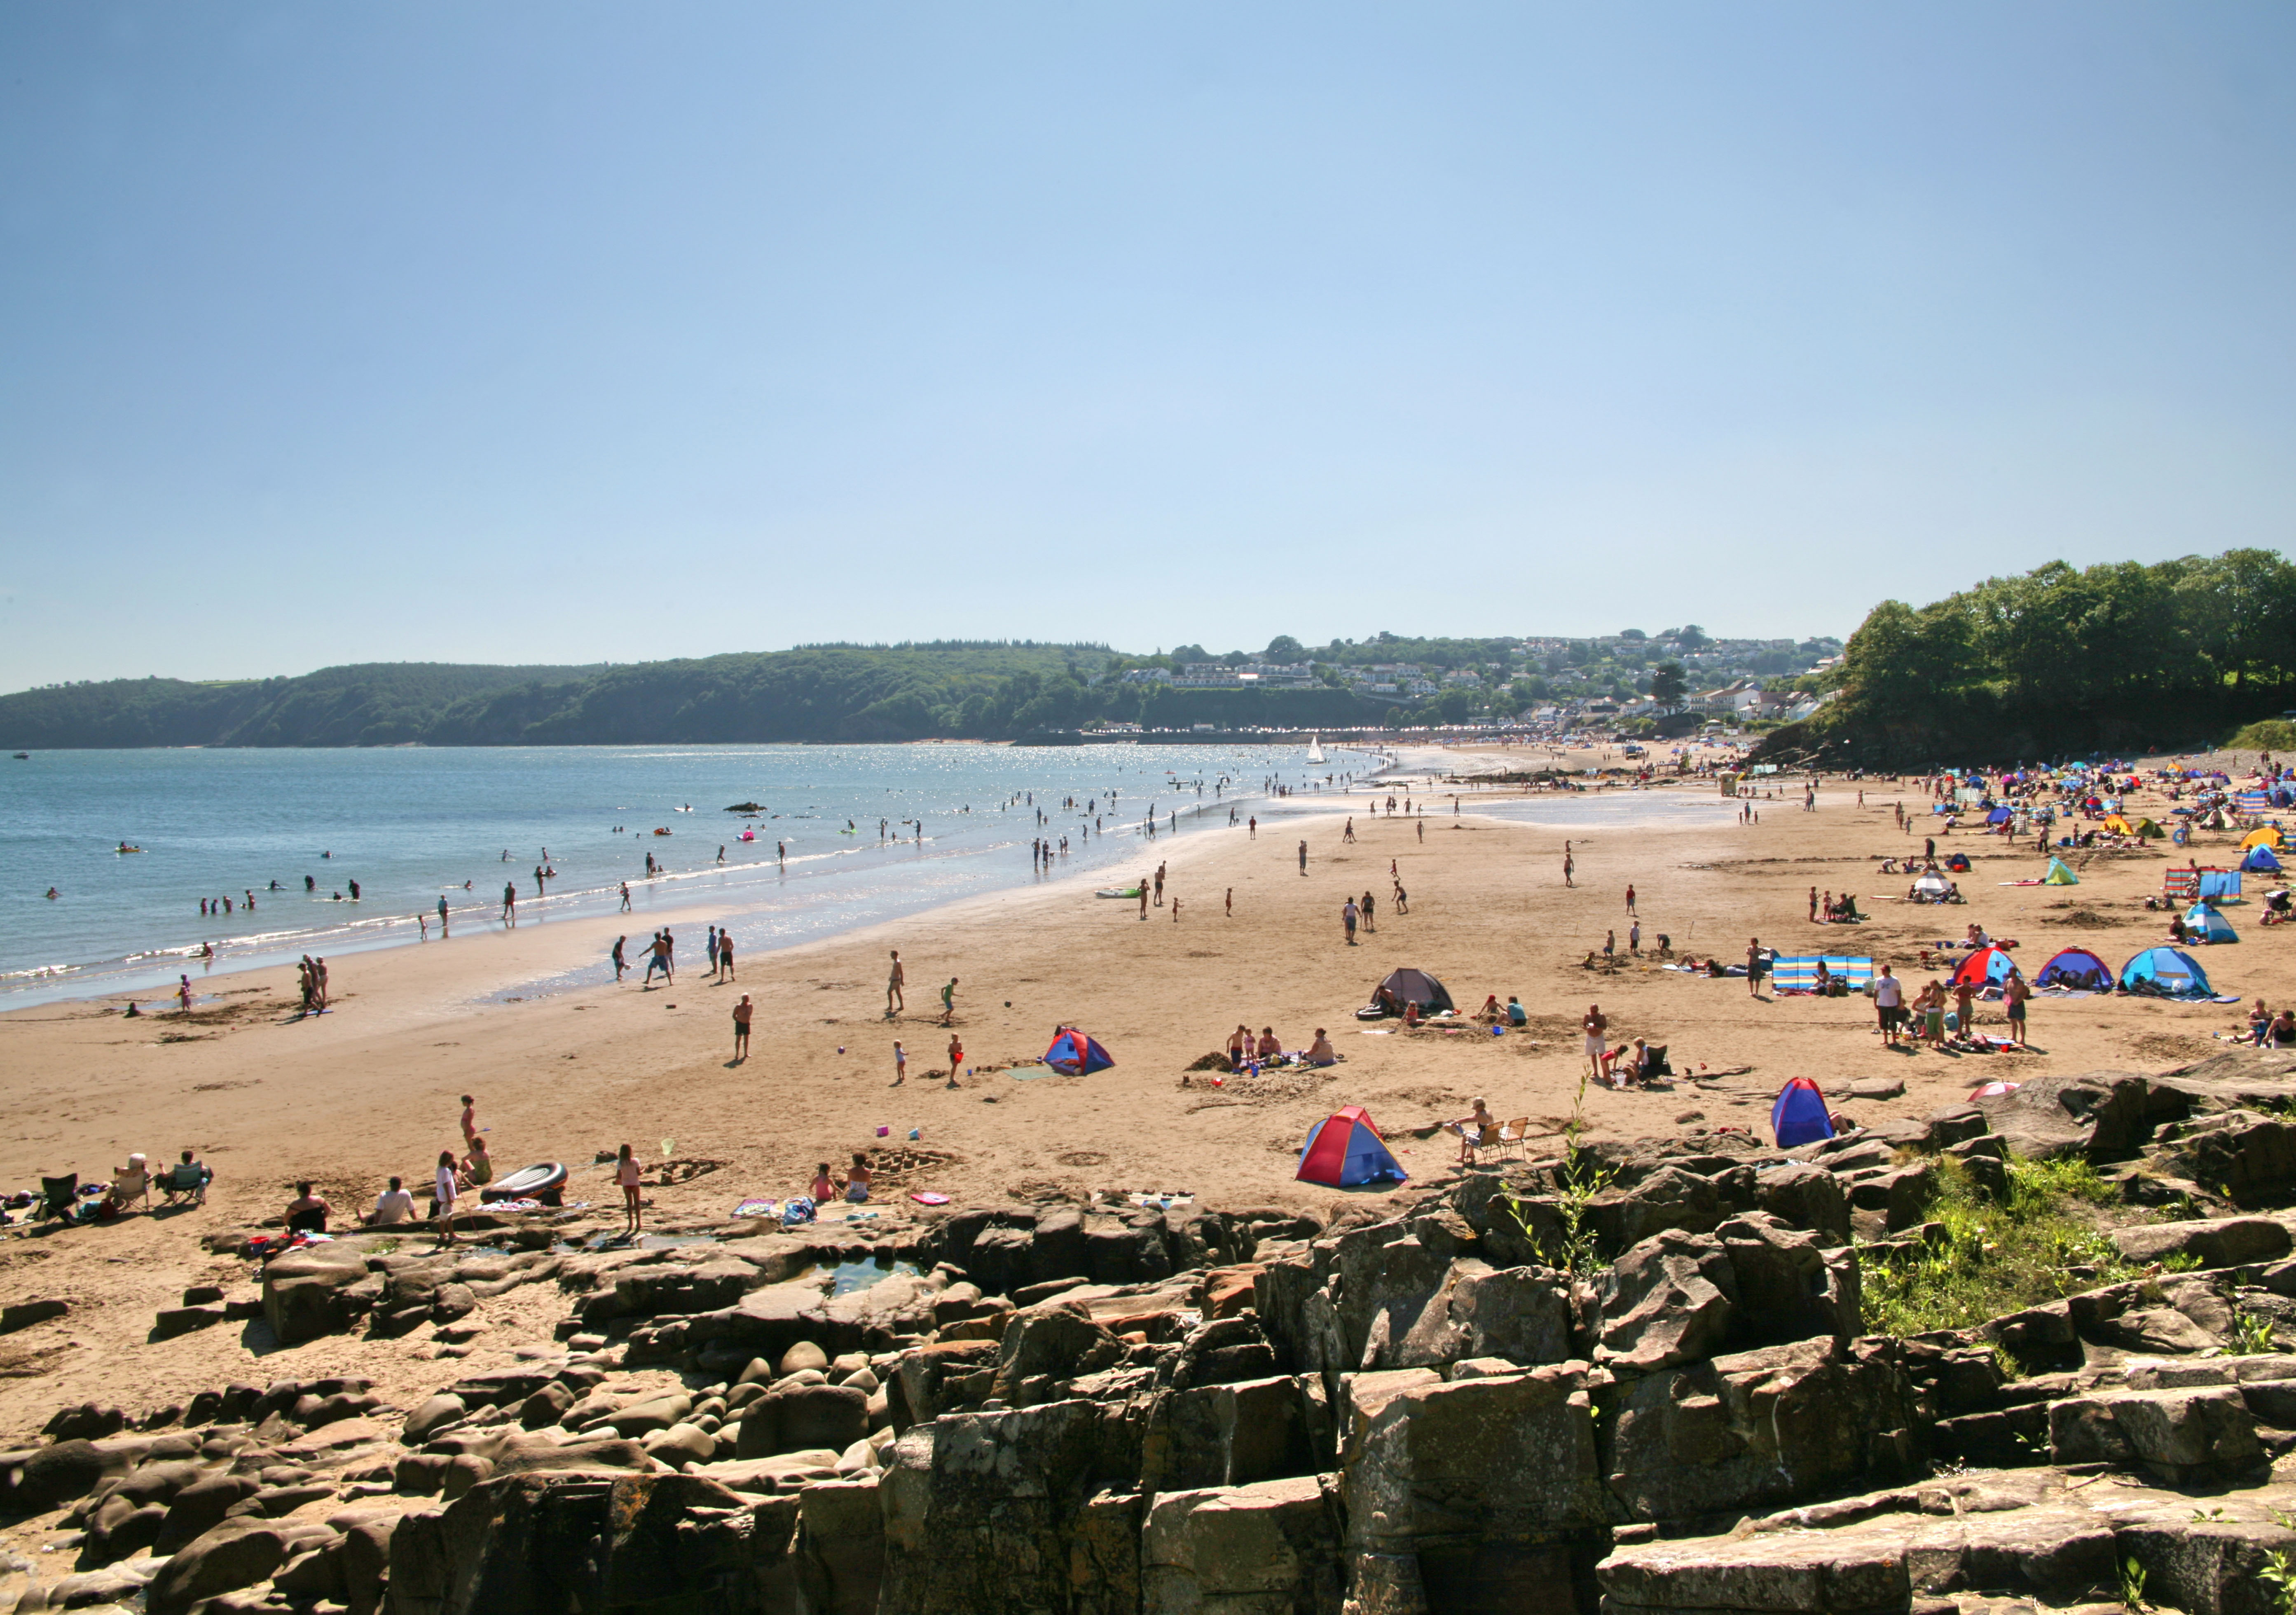 Saundersfoot Beach has been named one of the most sustainable beaches in the world